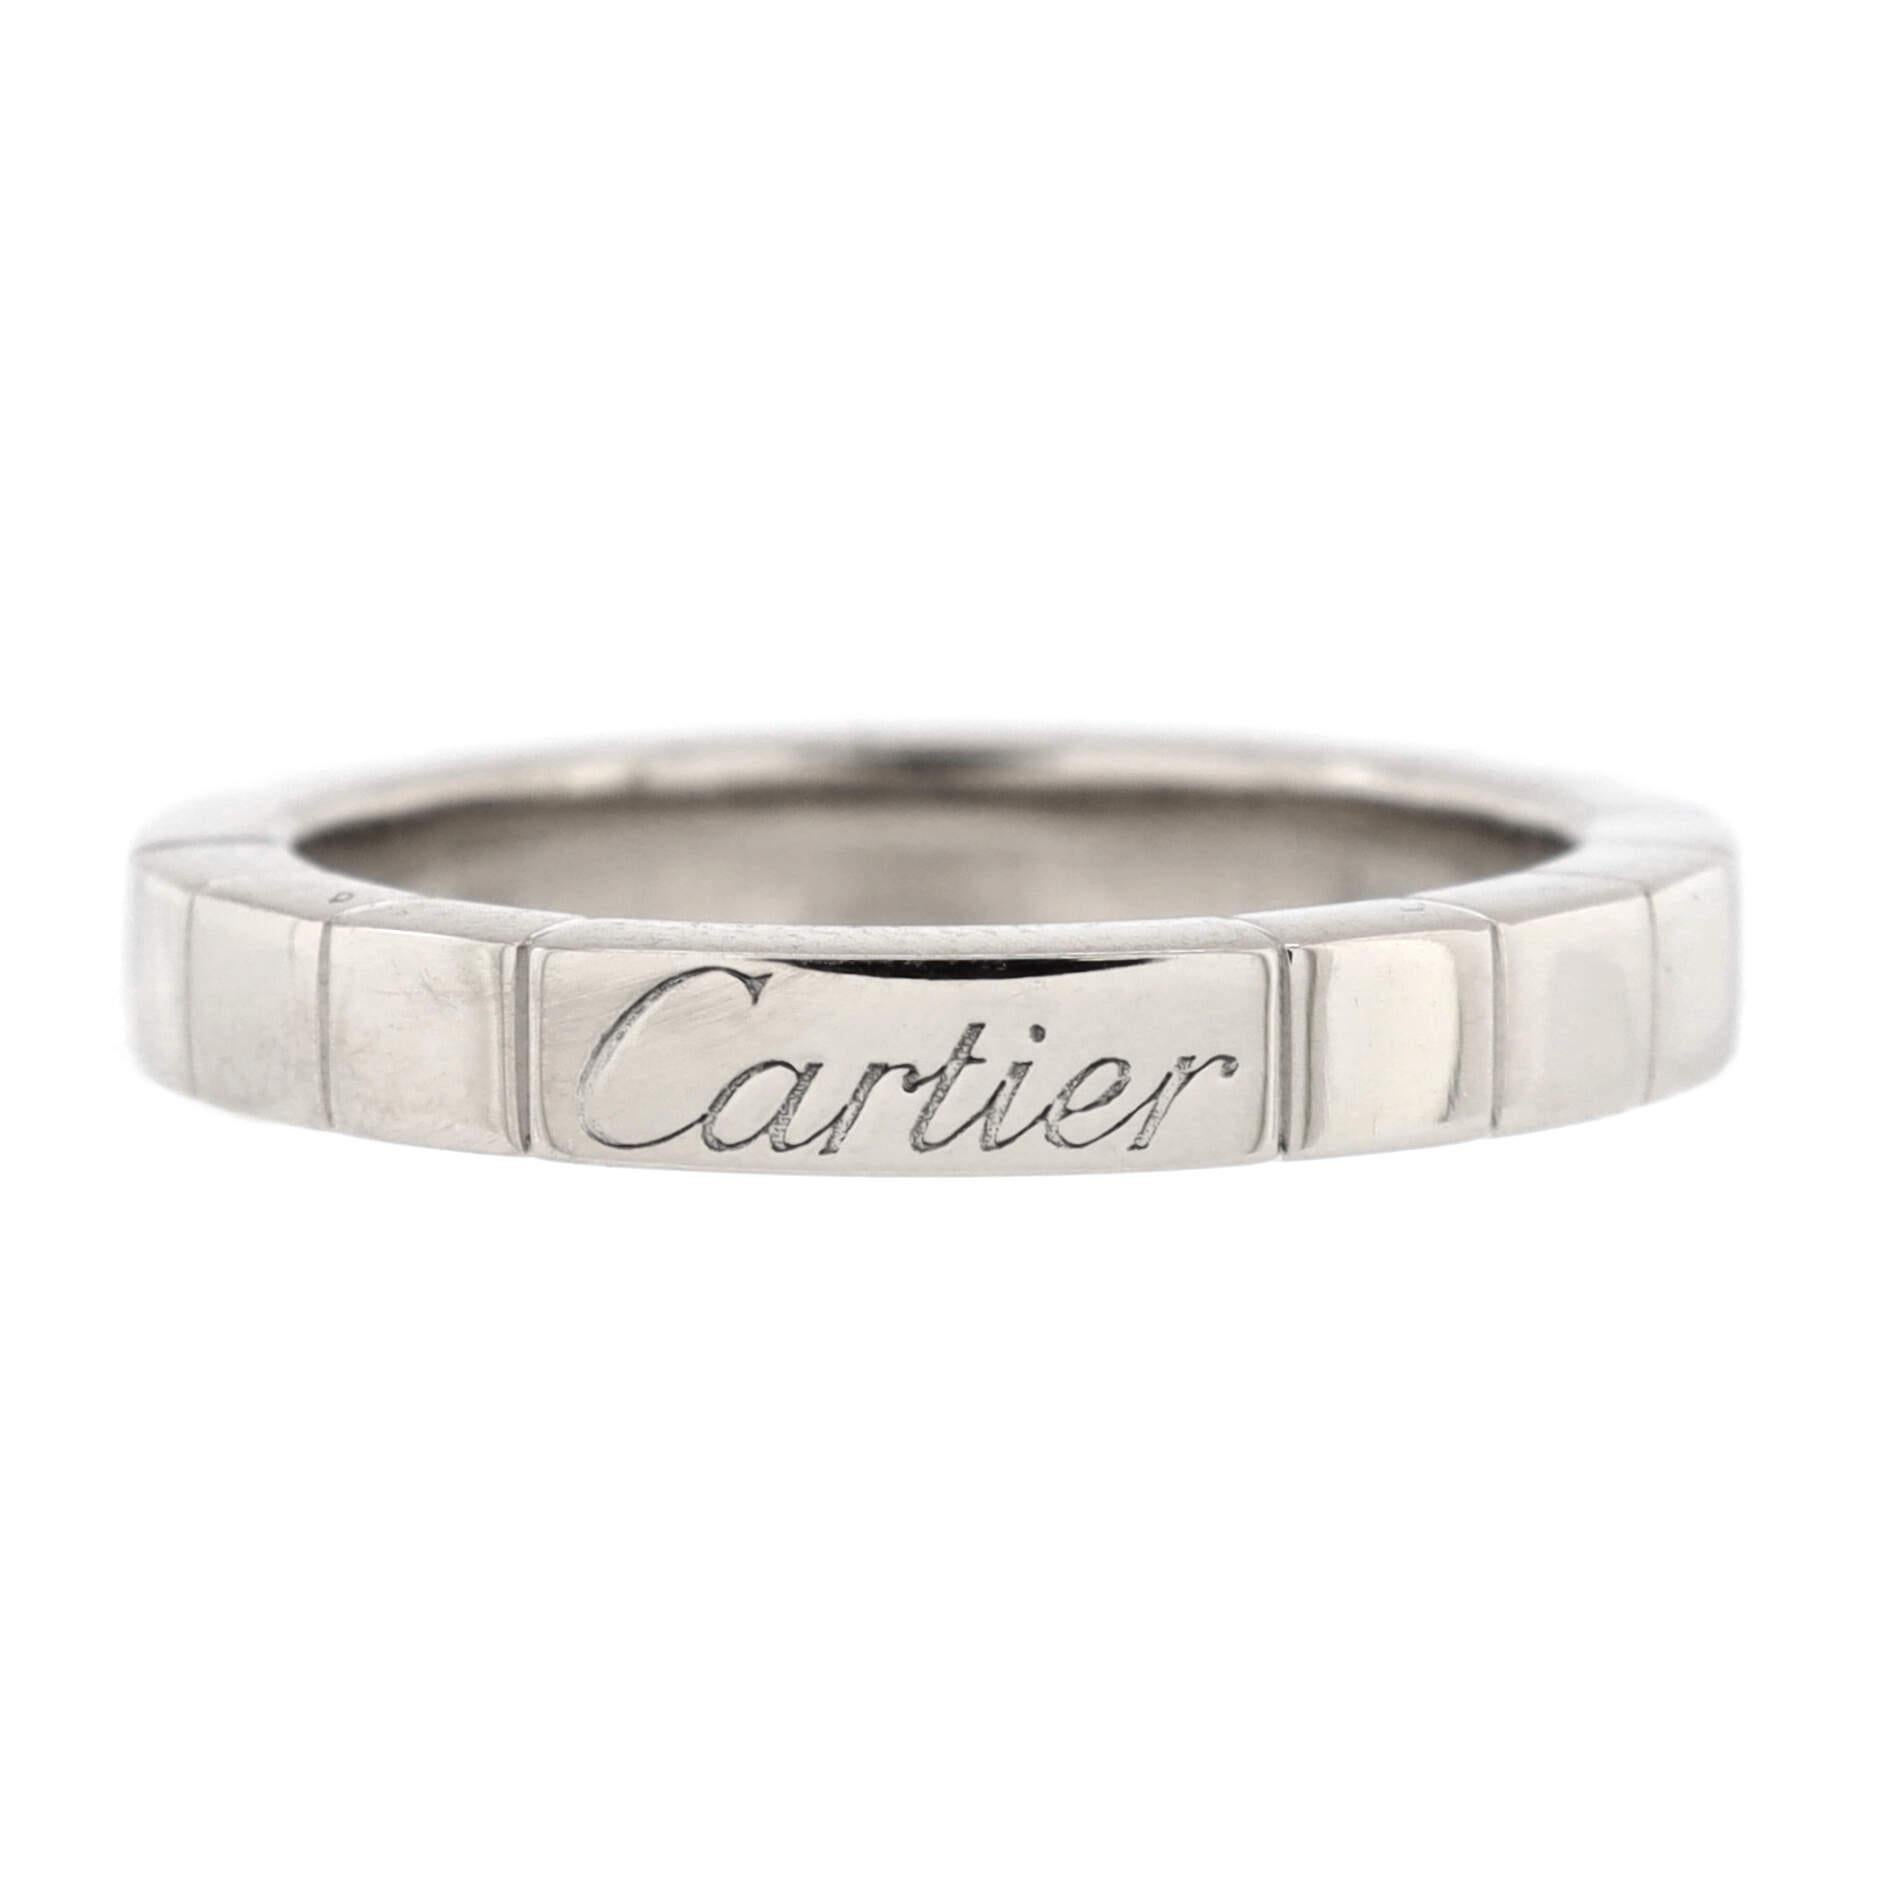 Condition: Moderately heavy wear throughout and would benefit from polishing and rhodium plating.
Accessories: No Accessories
Measurements: Size: 5.25 - 50, Width: 2.90 mm
Designer: Cartier
Model: Lanieres Ring 18K White Gold
Exterior Color: White